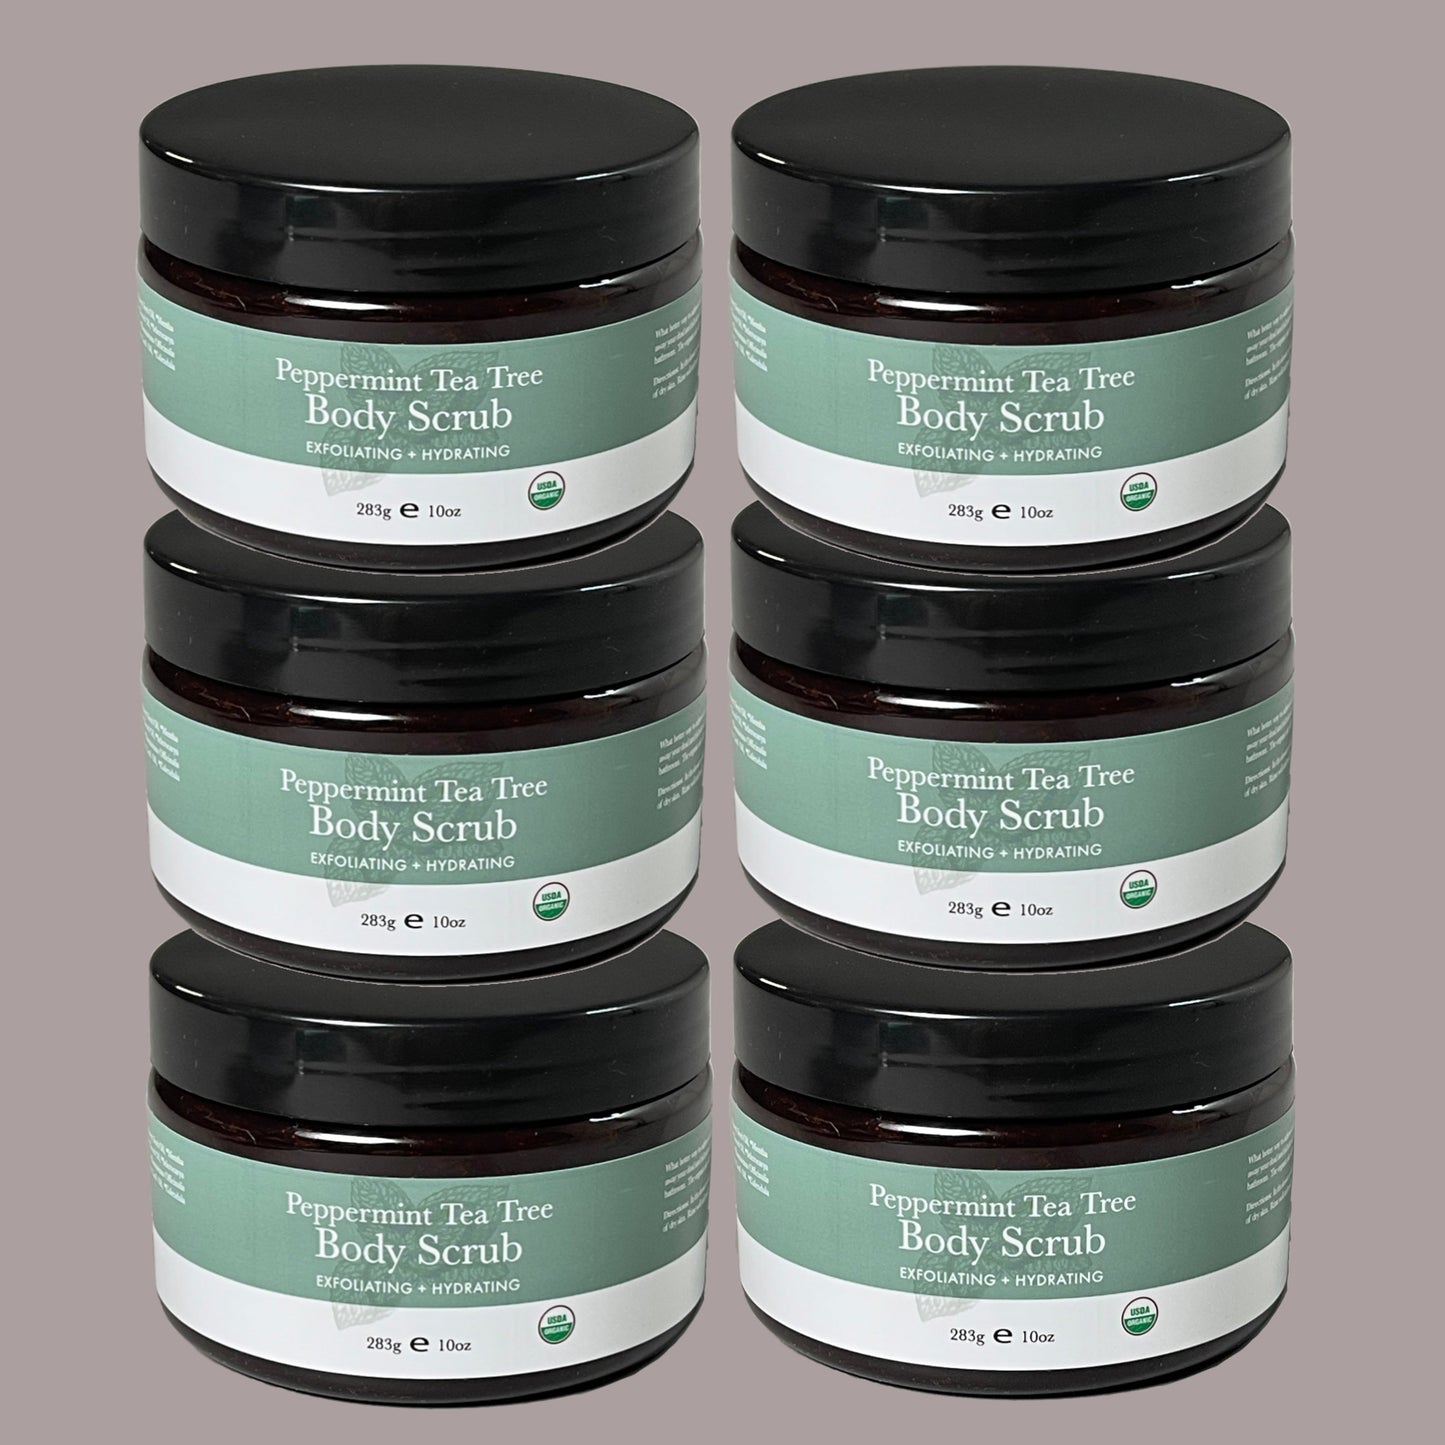 BEAUTY BY EARTH 6-PACK! Peppermint Tea Tree Body Scrub (Exfoliate, Smoothing) 10 oz BB 10/23